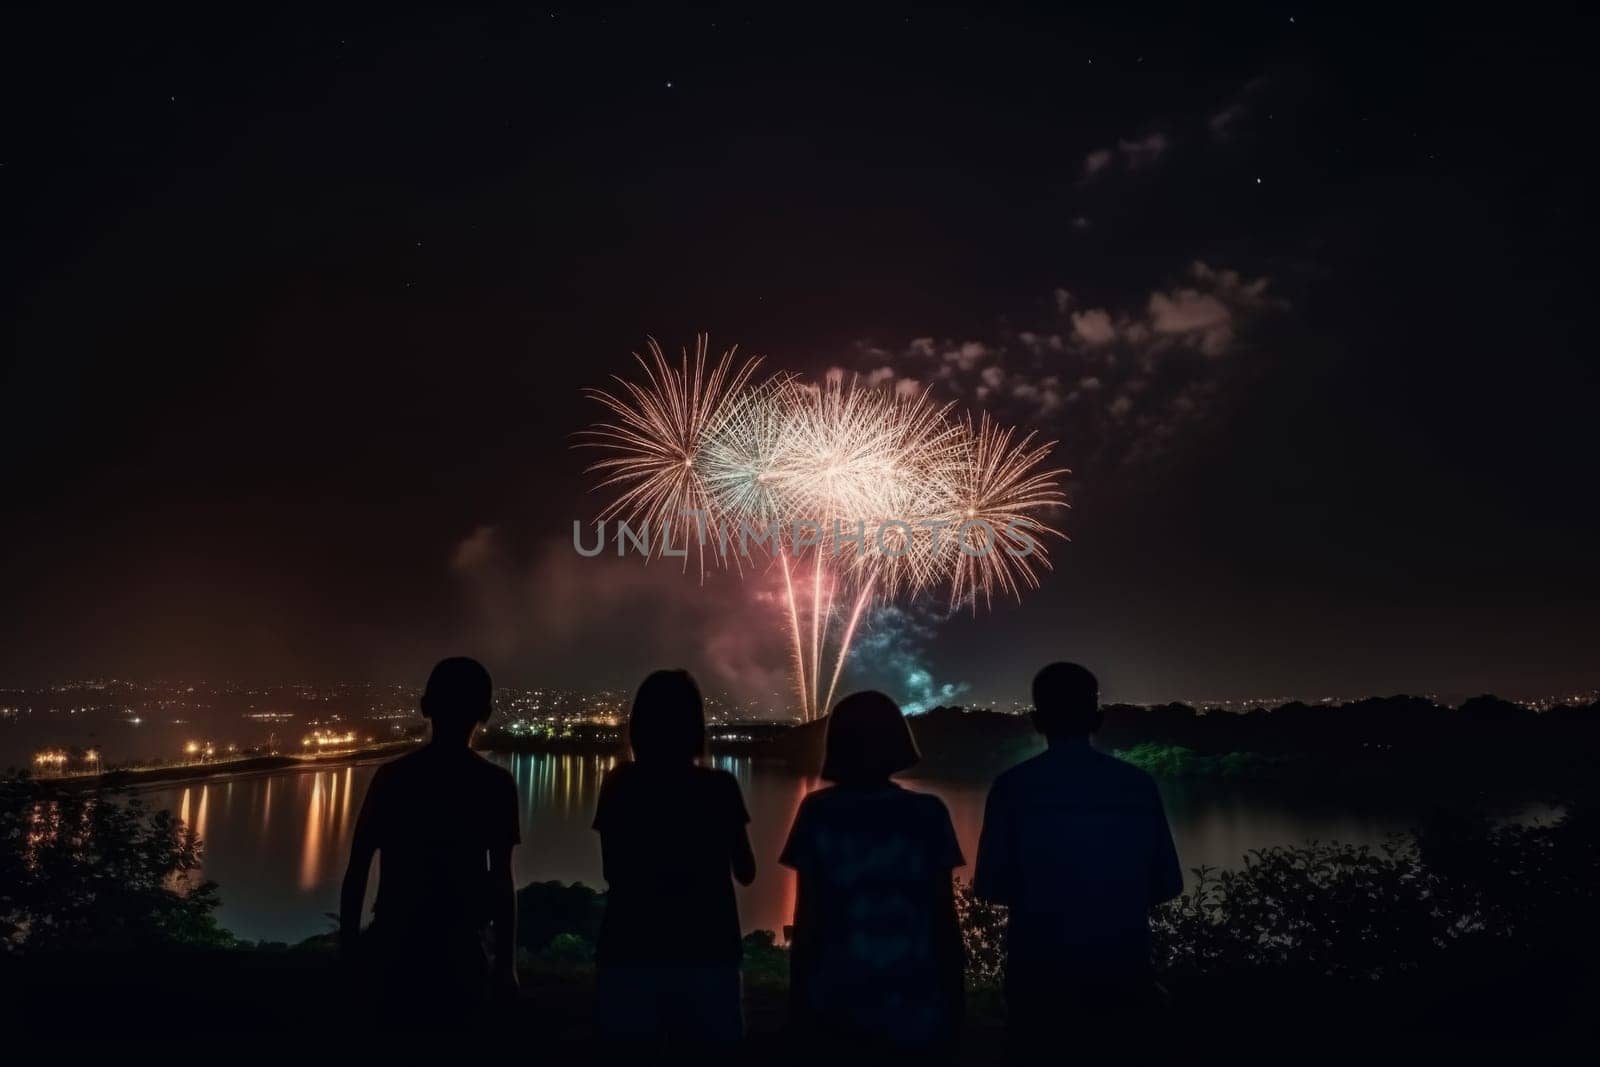 A small group of individuals captured in a serene moment, engrossed in the spectacle of vibrant fireworks illuminating the night sky